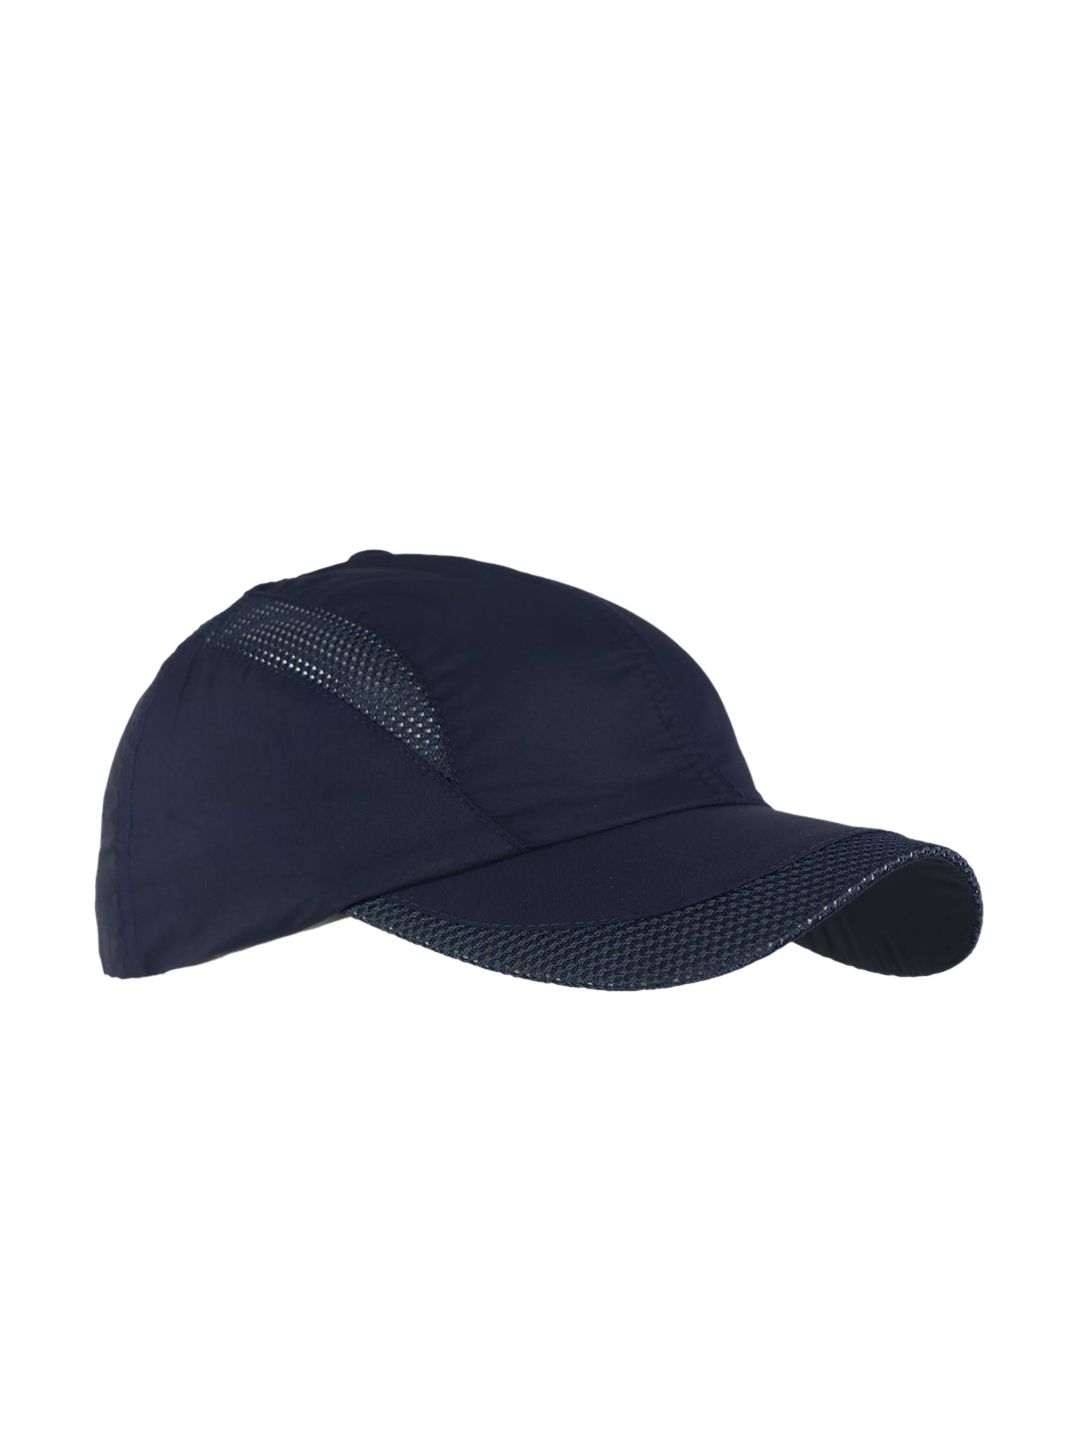 iSWEVEN Unisex Blue Solid Snapback Cap Price in India